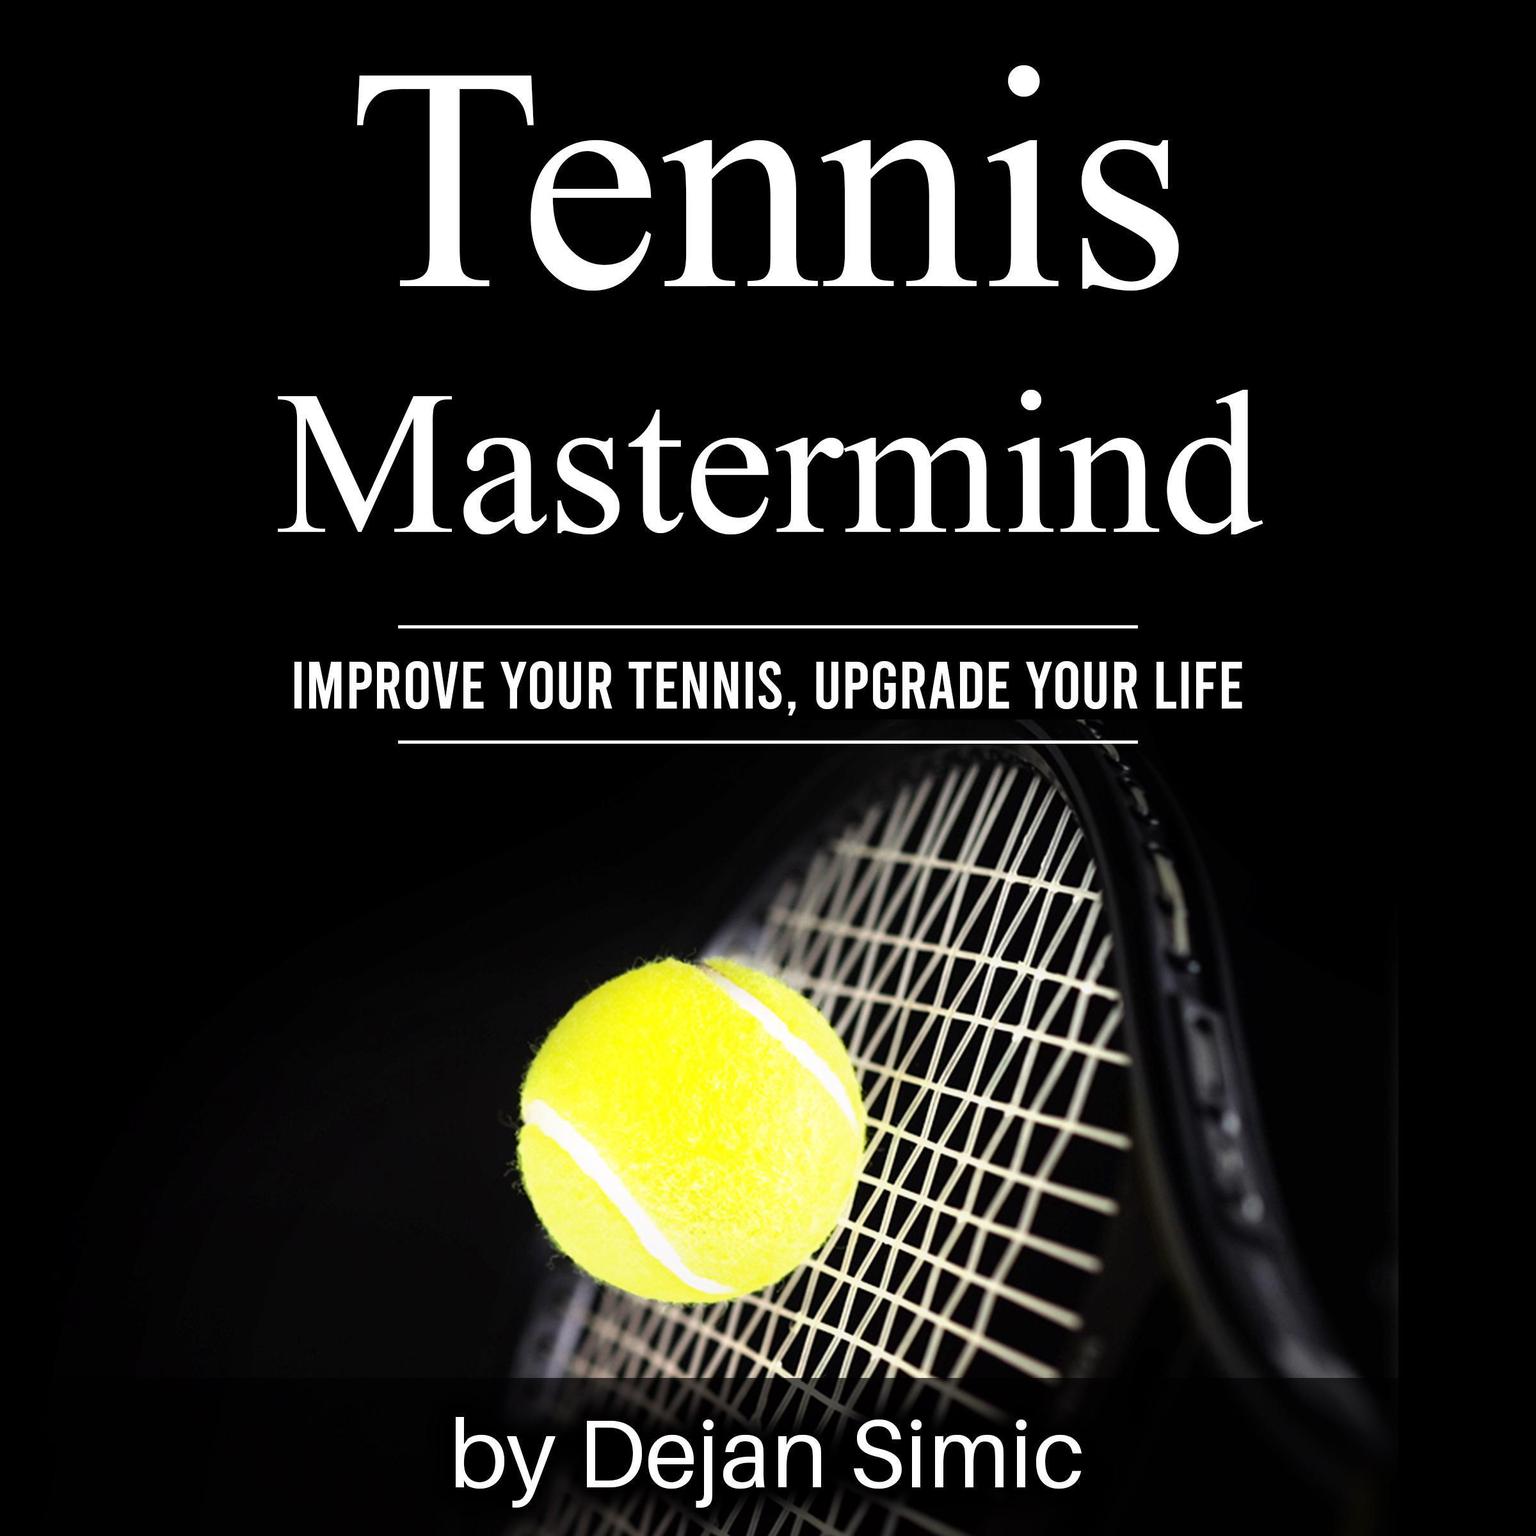 Tennis Mastermind: Improve Your Tennis and Upgrade Your Life Audiobook, by Dejan Simic